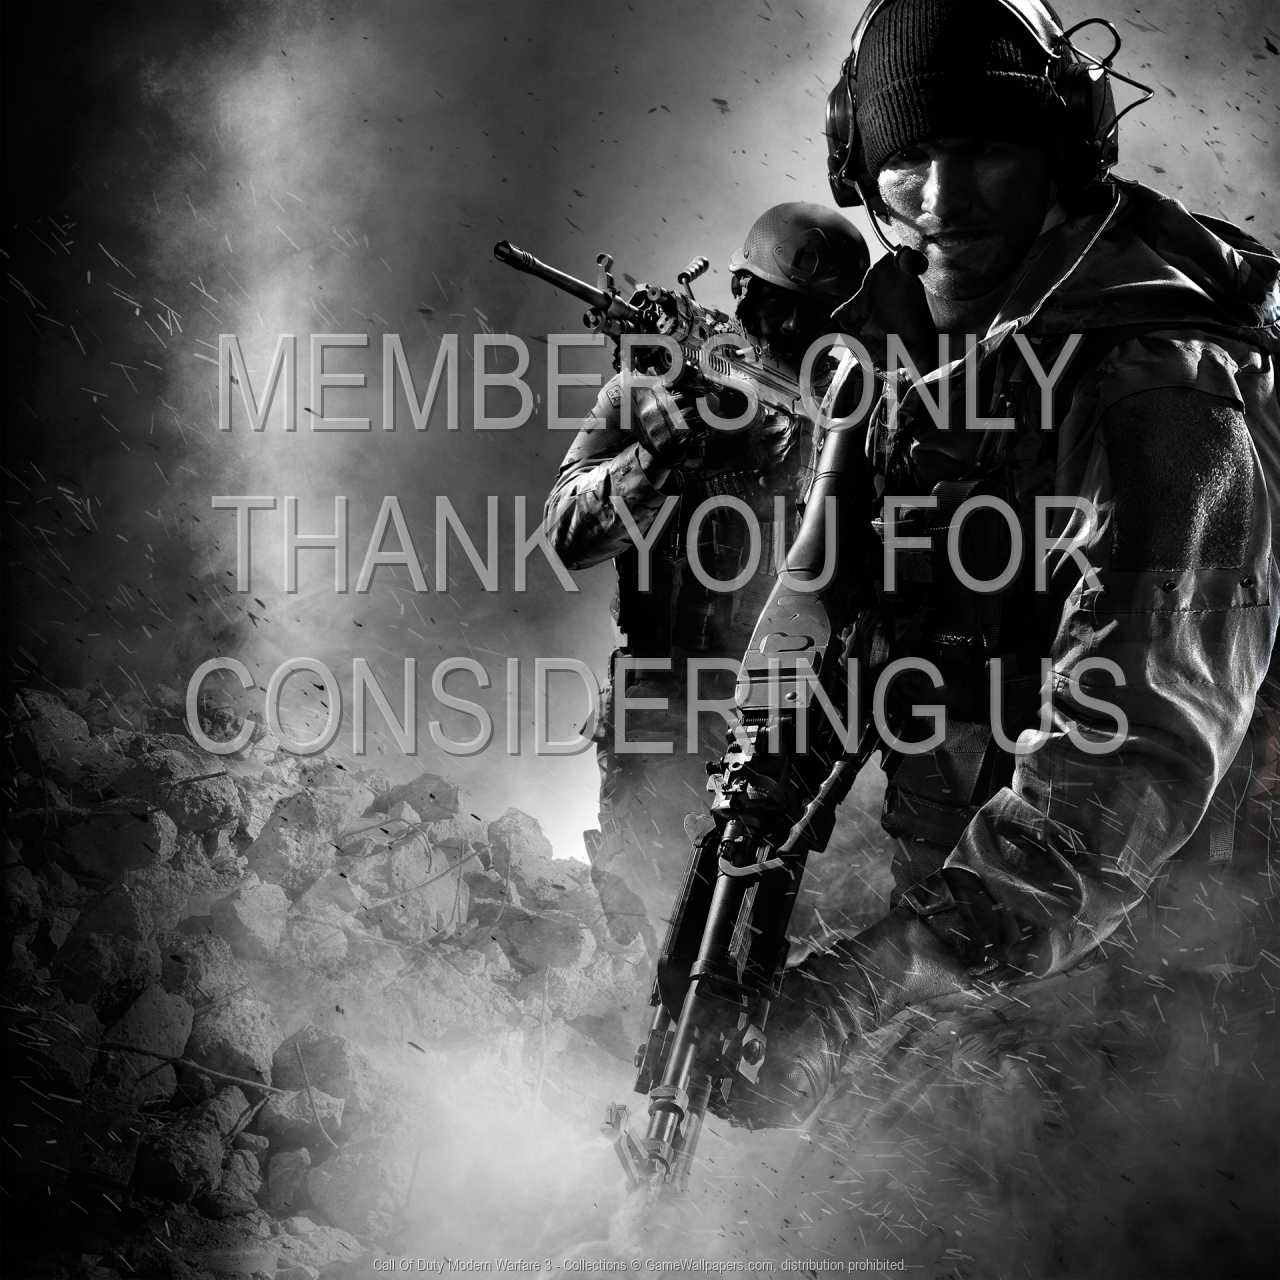 Call Of Duty: Modern Warfare 3 - Collections 720p Horizontal Mobile wallpaper or background 01